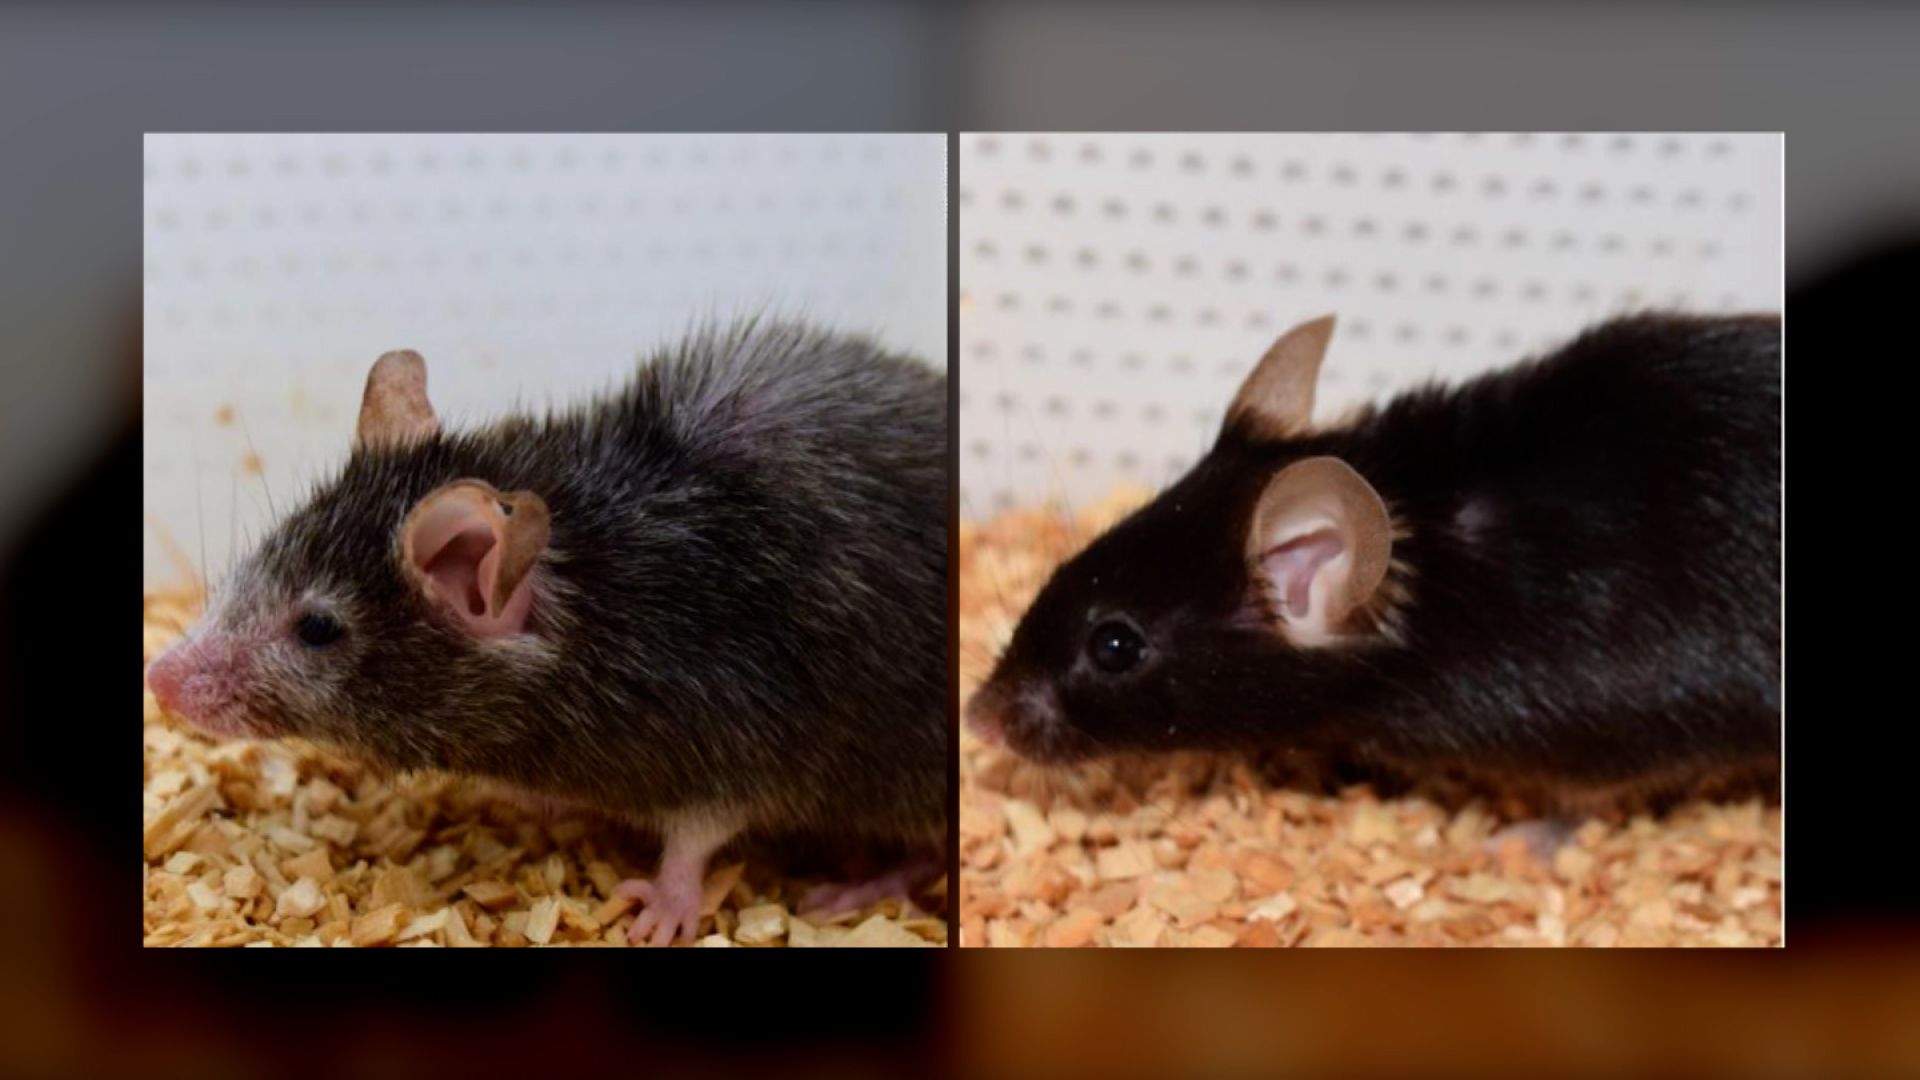 Of Mice And Men: Translating Mouse Age To Human Age - Gowing Life